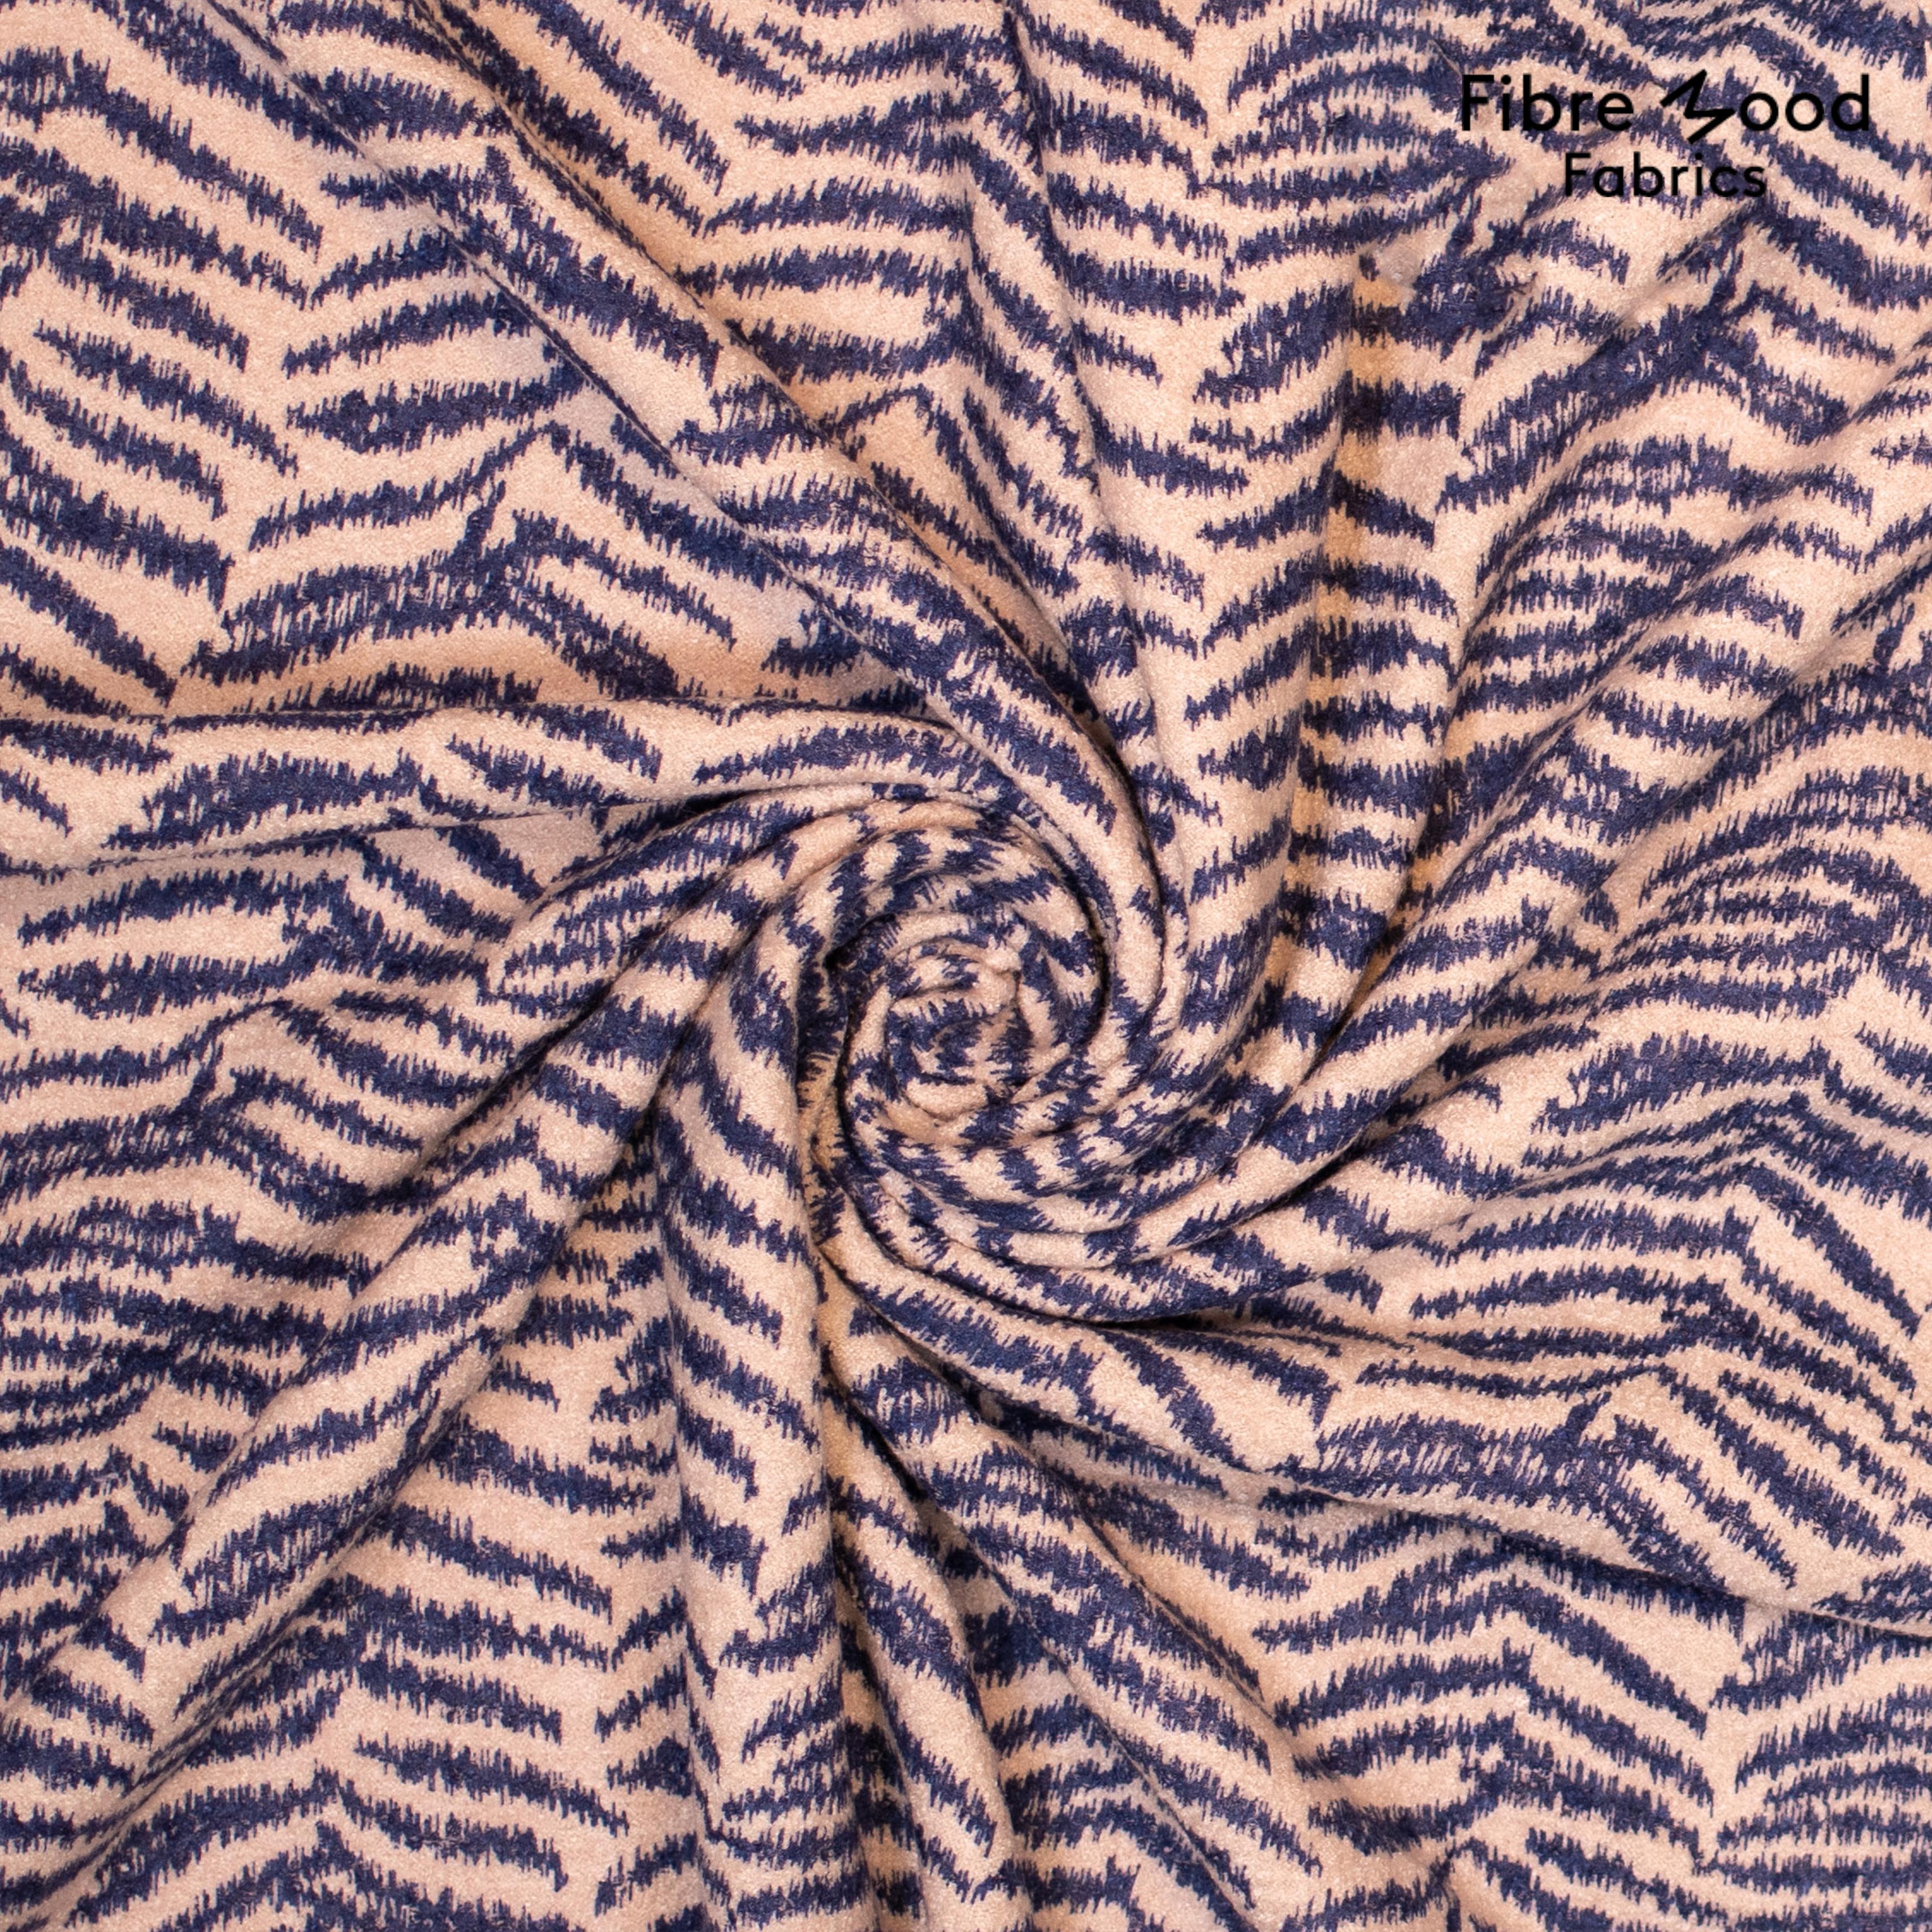 No. 452 knitted wool fabric with zebra pattern